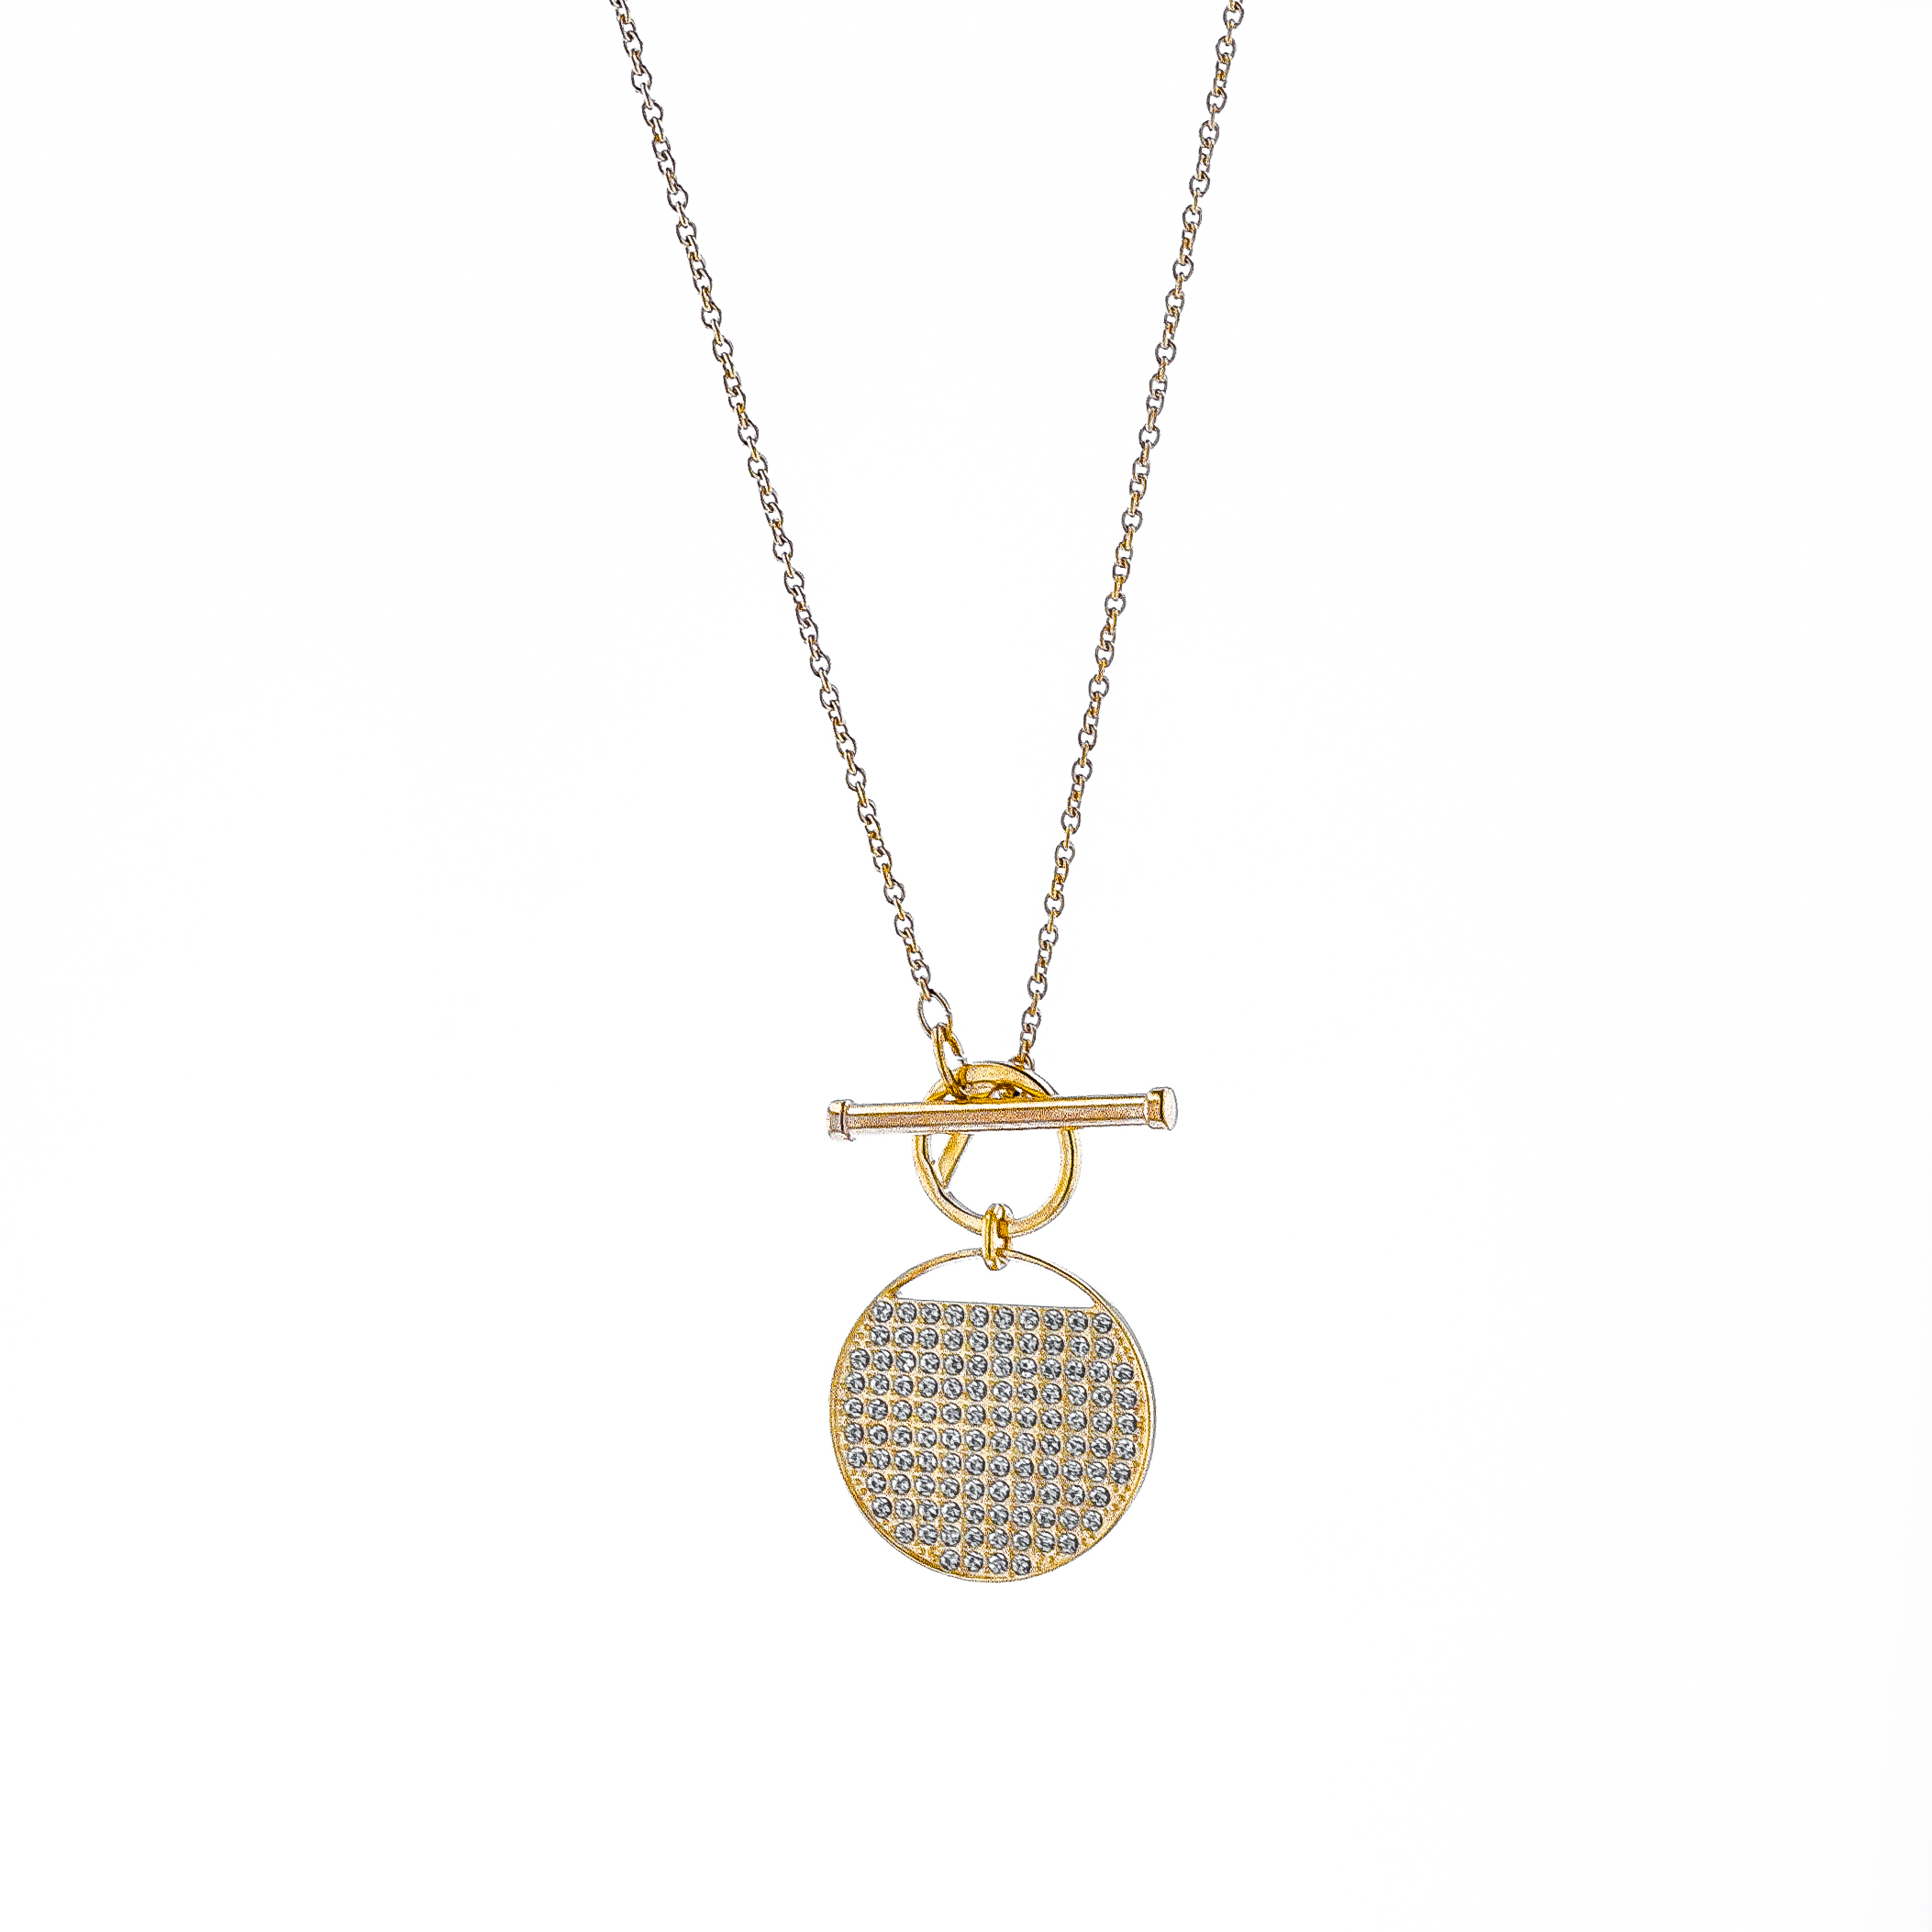 Swarovski Women's White Crystal and Rose Gold Plated Ginger T-Bar Pendant Necklace - image 2 of 2